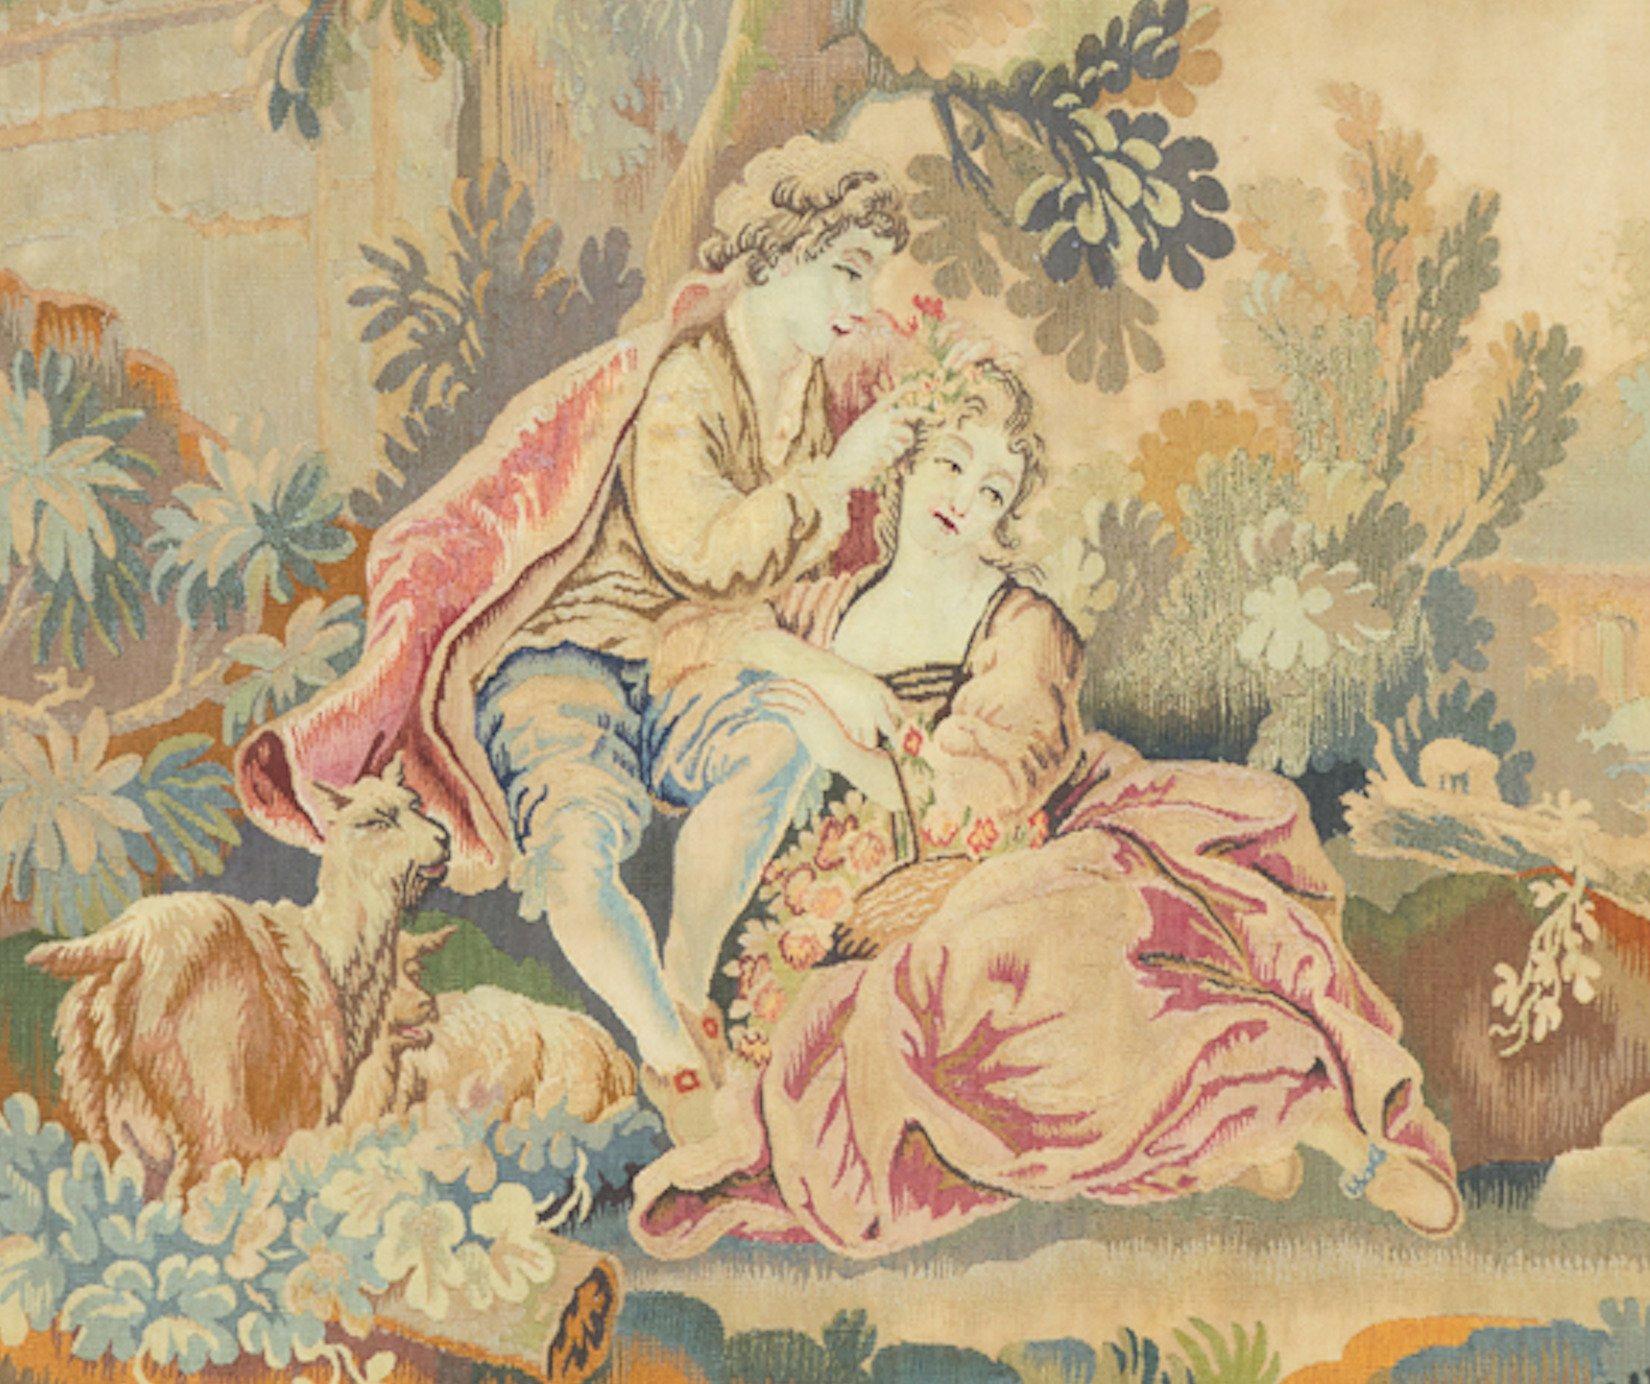 Antique 19th century French Aubusson Tapestry depicting young courtiers spending a leisurely afternoon sitting in the woods within the splendidly maintained verdant palatial grounds. It is a Classic example of the Aubusson style of the 19th century